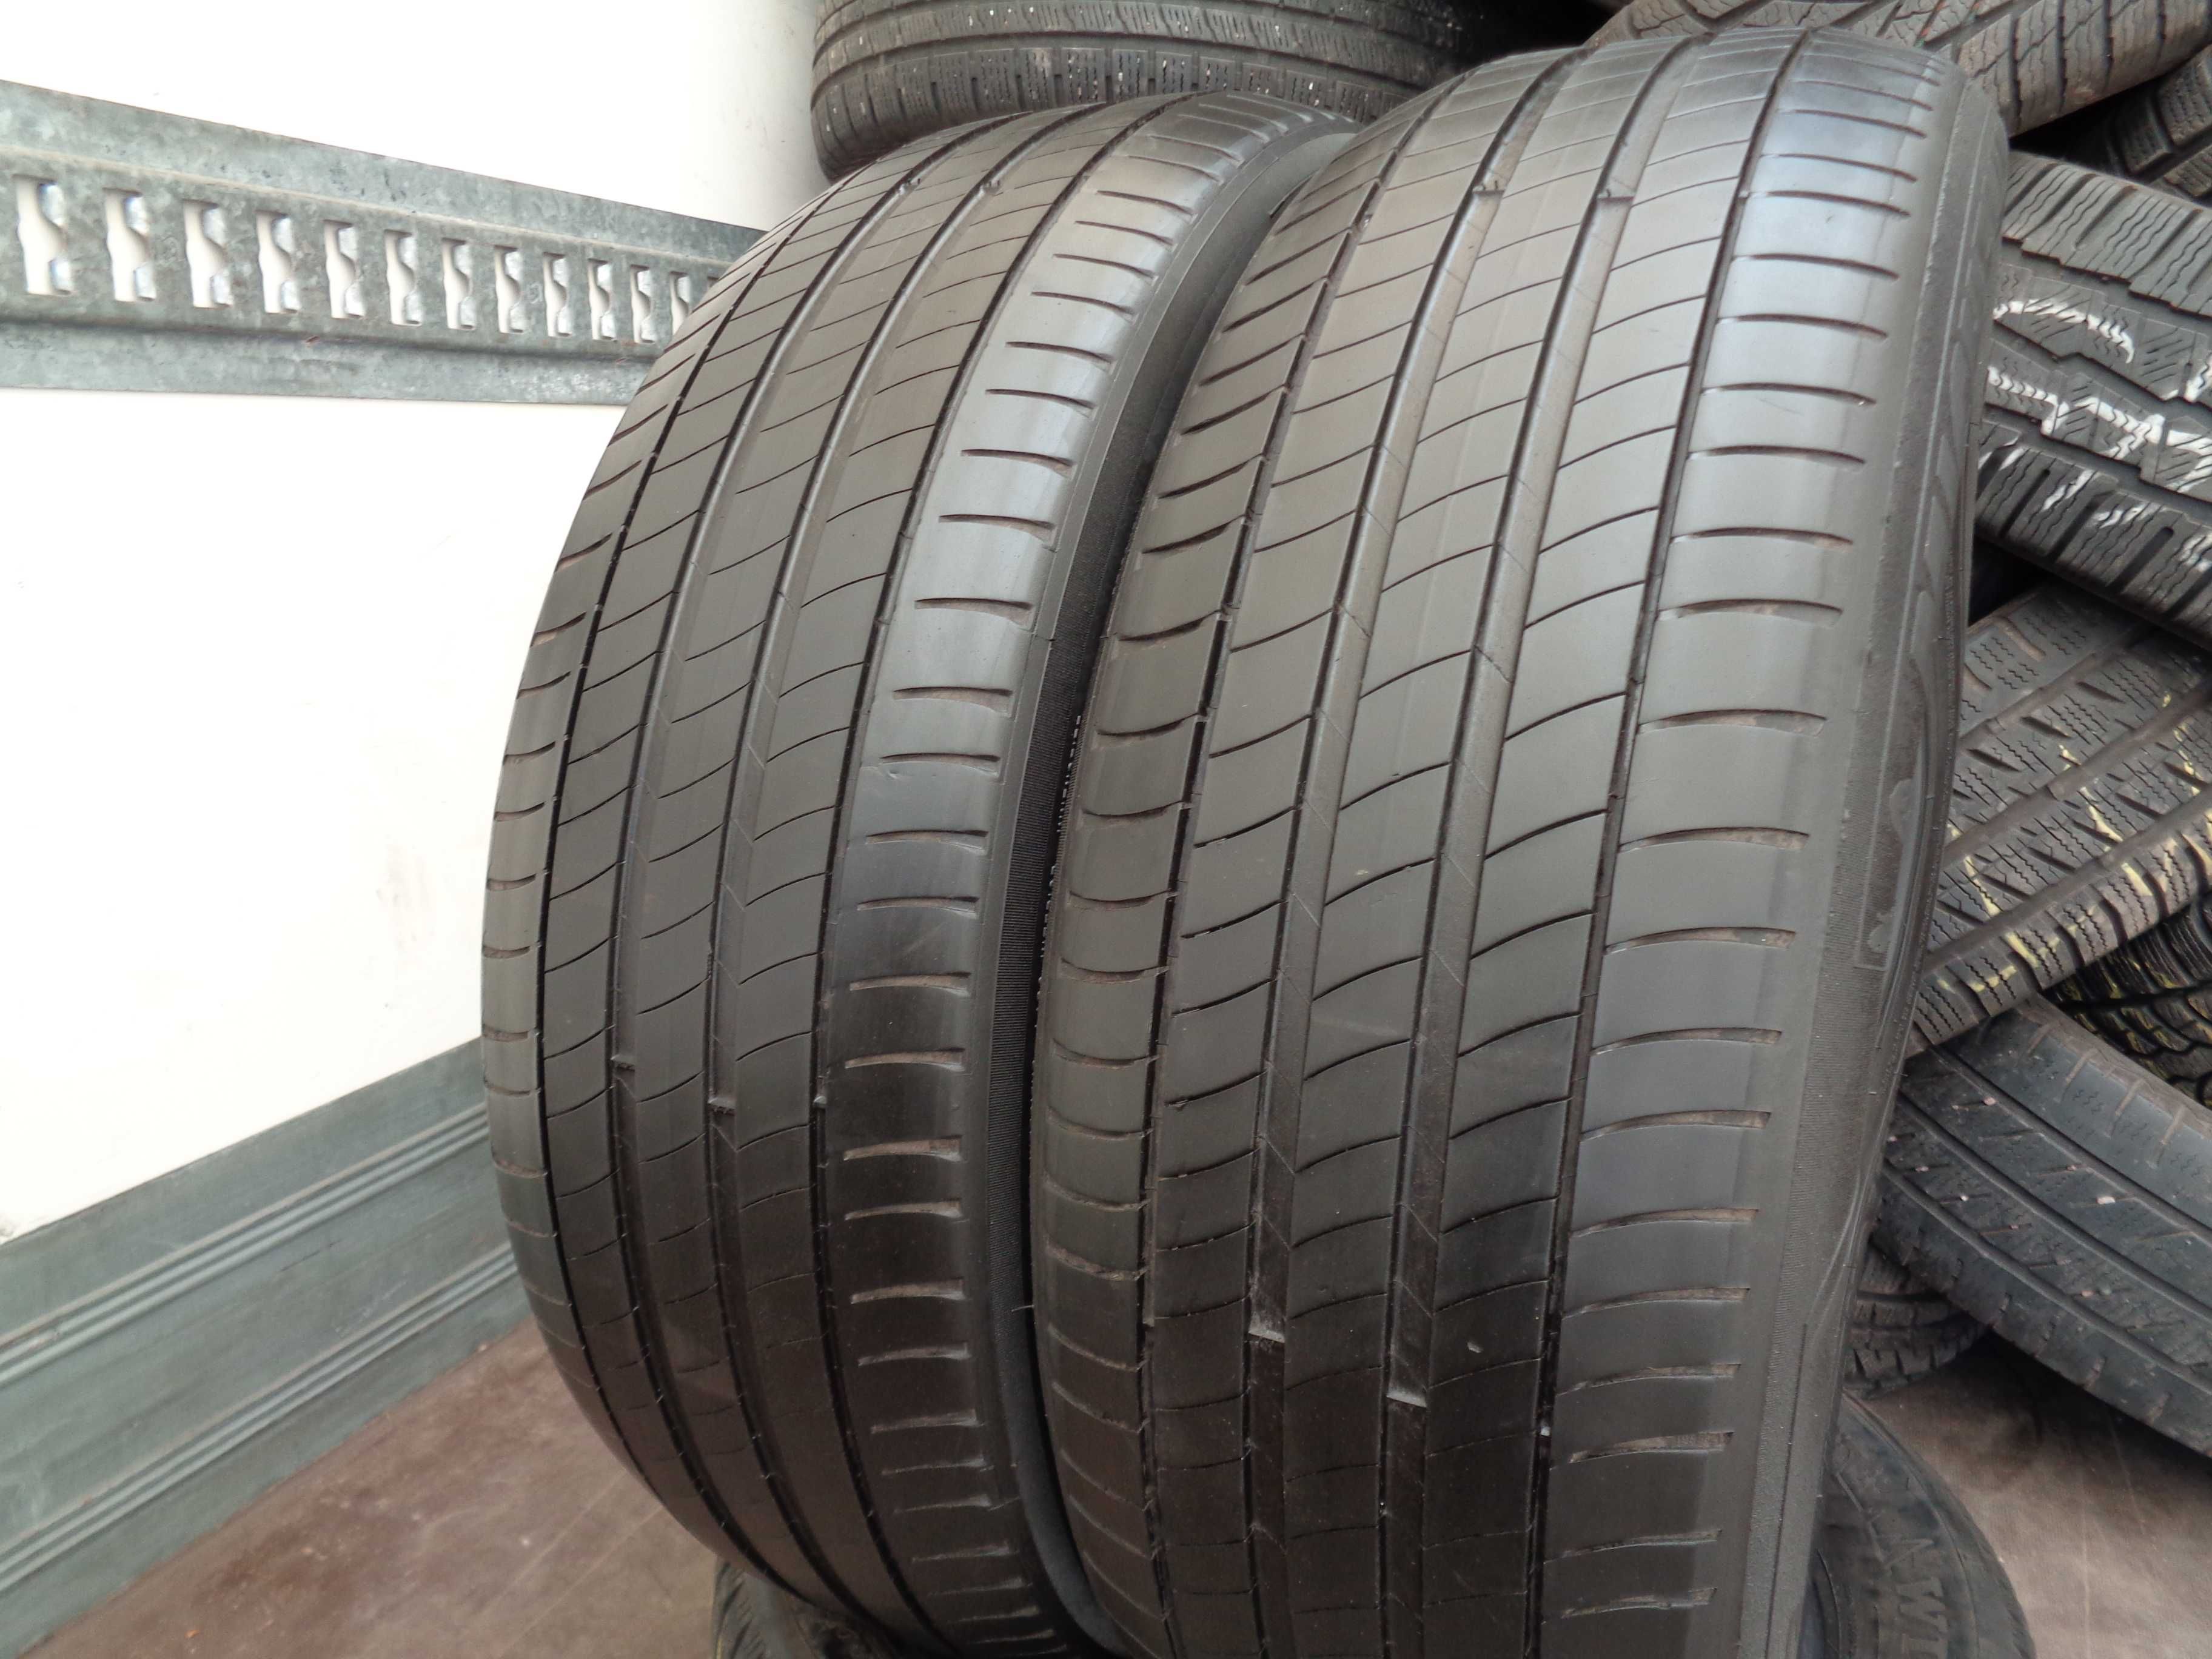 Michelin Primacy 3 S1 205/55r19 made in Spain 2шт 19год, 4,5-5мм, ЛЕТО